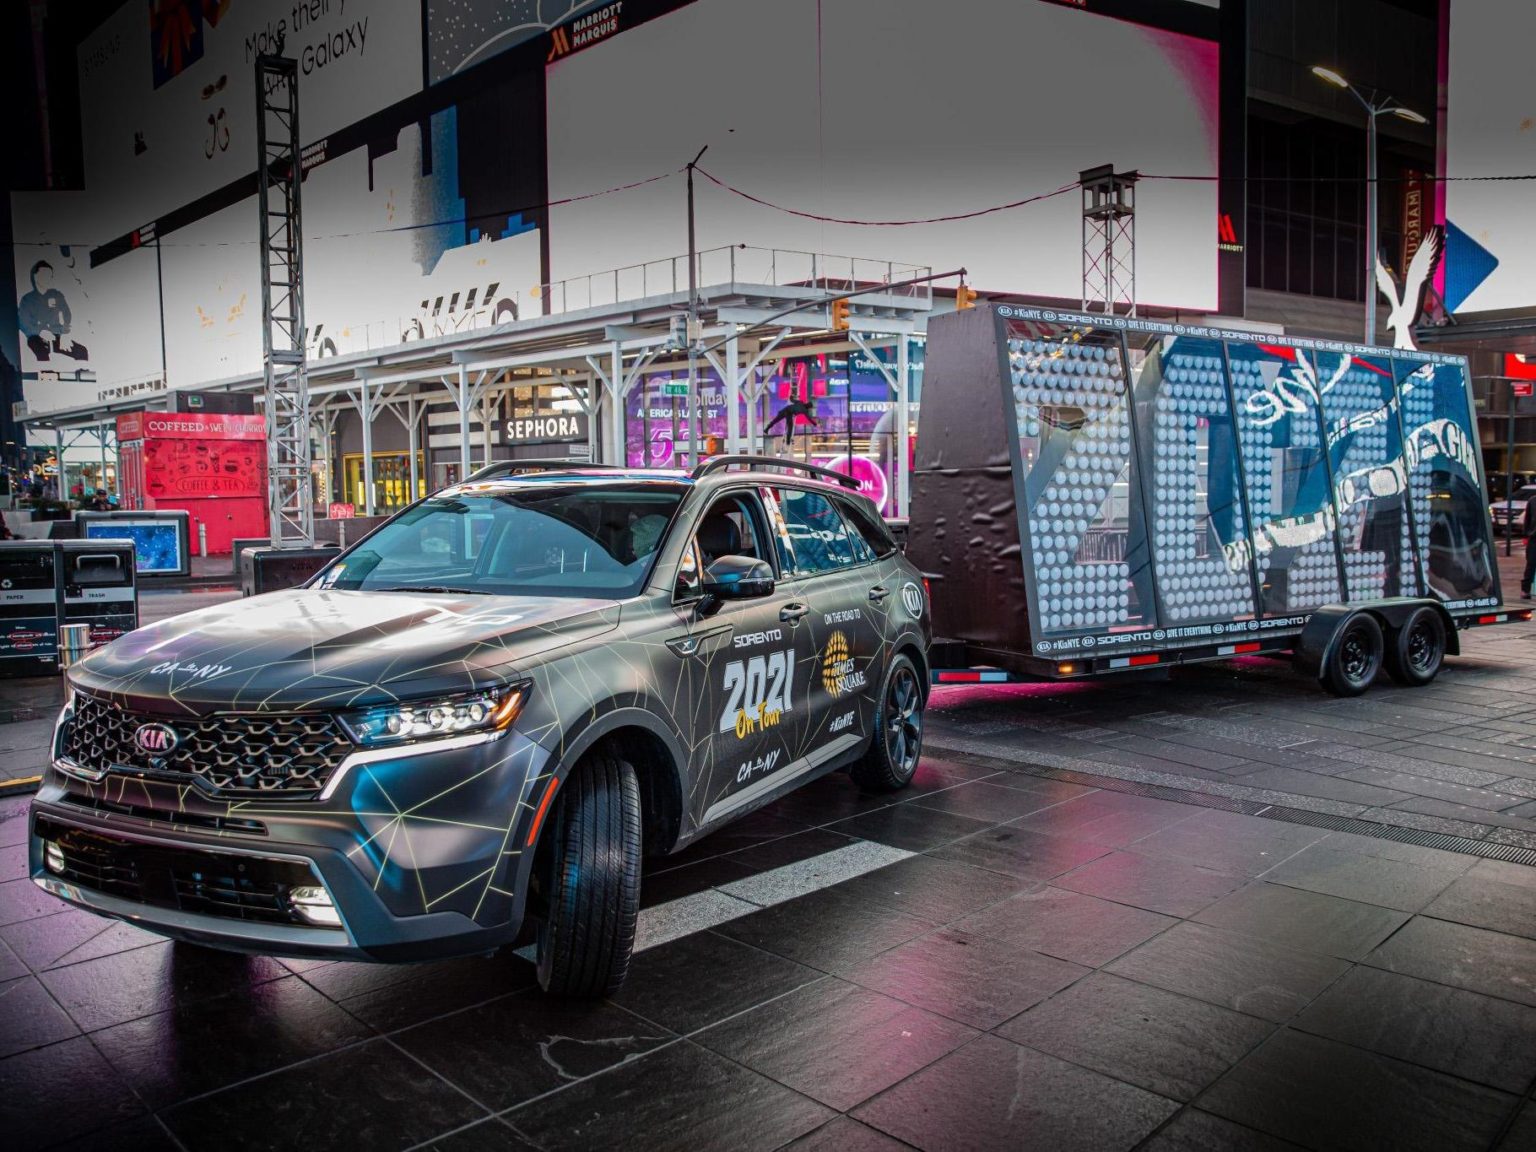 The 2021 Kia Sorento towed the "2021" numerals to Times Square in time for them to be installed as part of the New Year's Eve celebration.